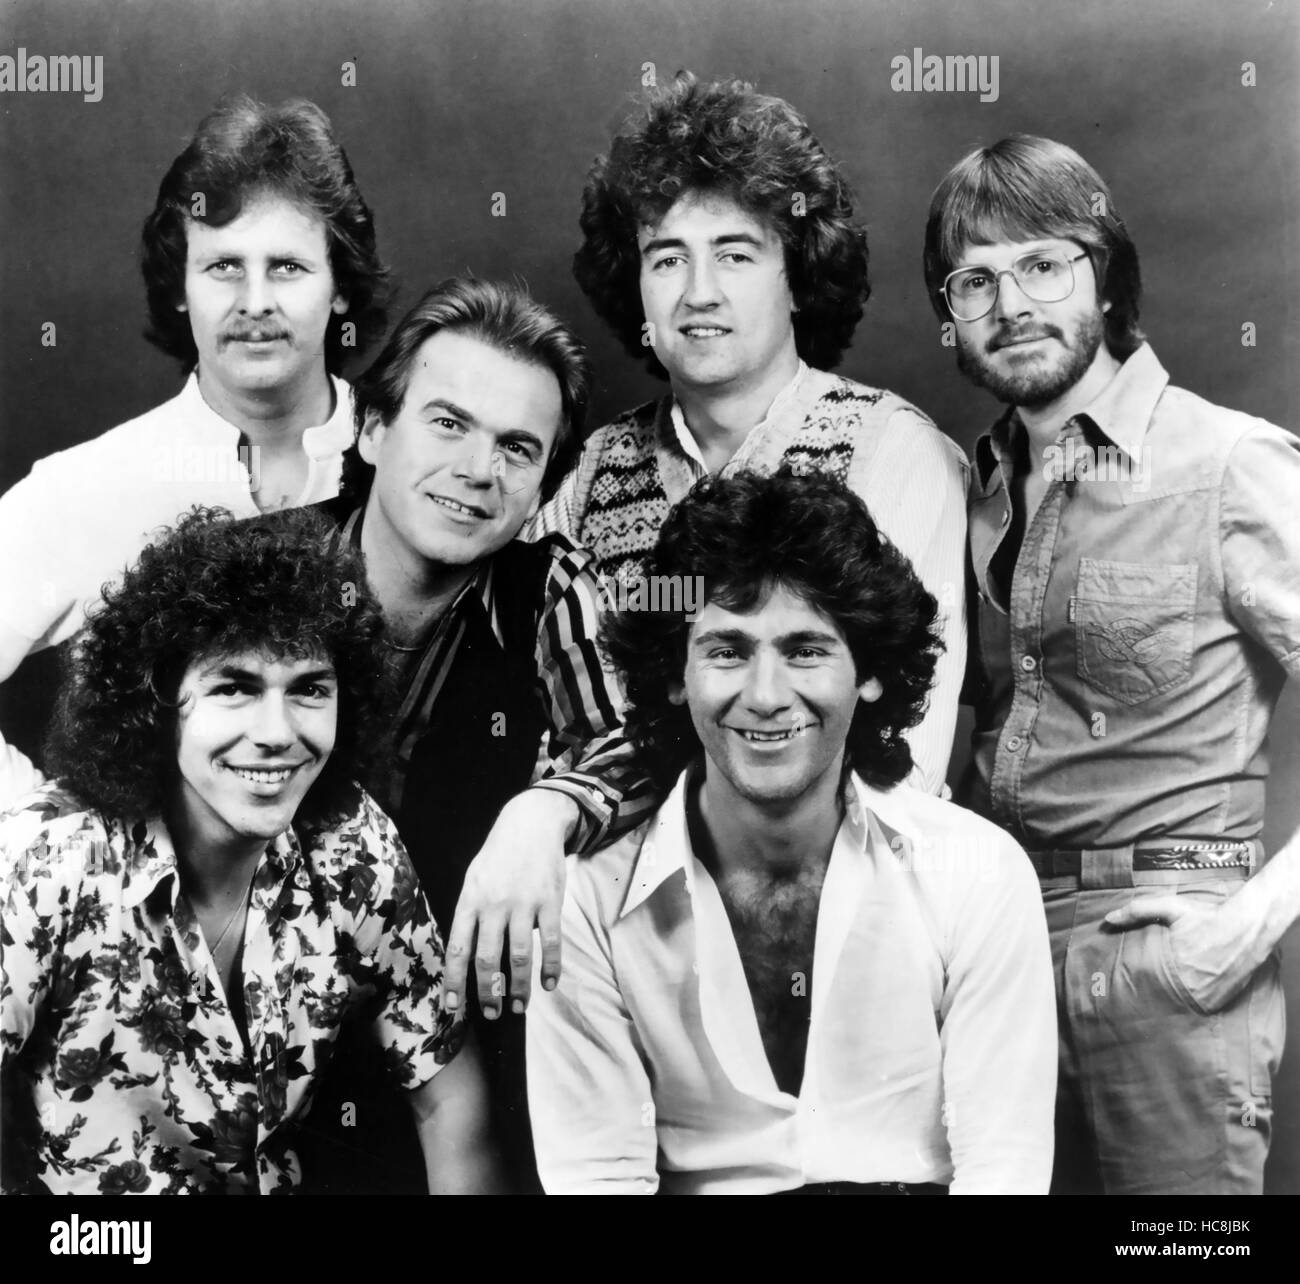 LITTLE RIVER BAND Australian rock group in a promotional photo from Harvest records about 1978. Back row from left: David Briggs, Glen Shorrock, George McArdie, Graham Goble. Front two from left: Beeb Birtles, Derek Pellici Stock Photo